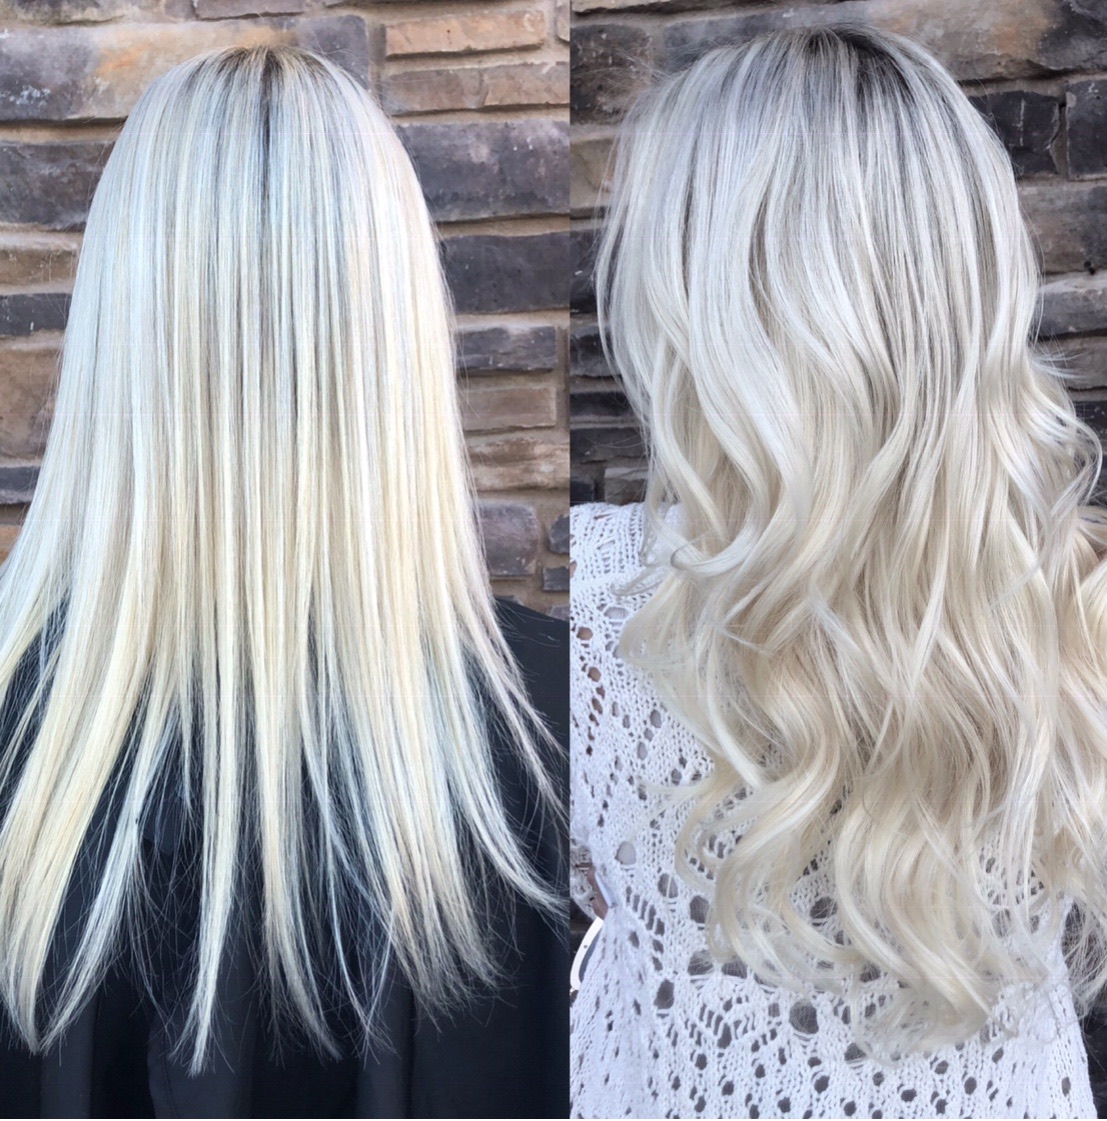 Hair Extensions in Phoenix & Scottsdale | Focal Point Salon & Spa